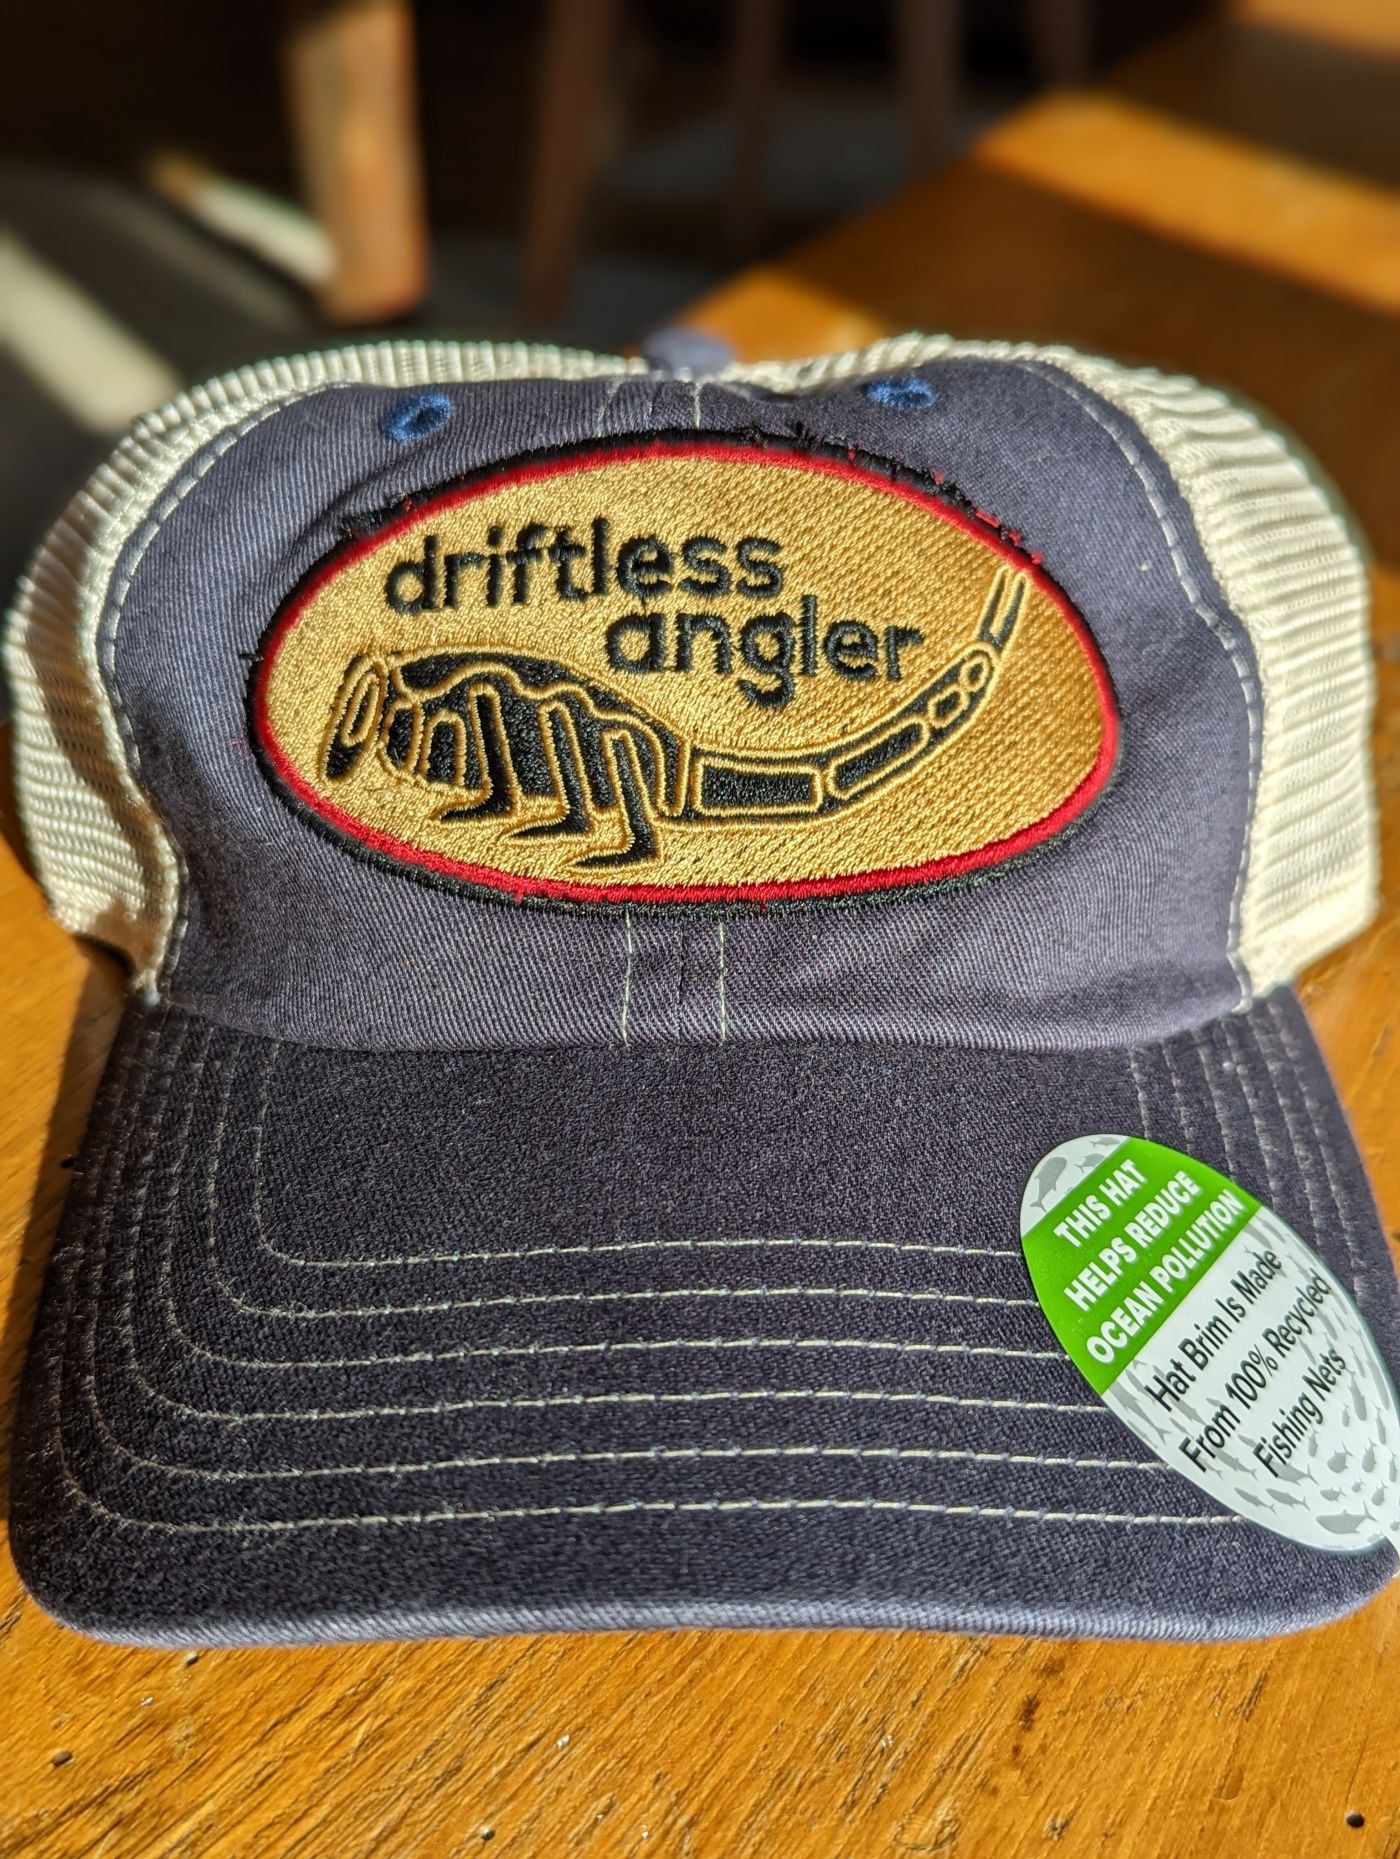 Fly Fishing Trucker Hats, Beanies, and Caps from Patagonia, Orvis